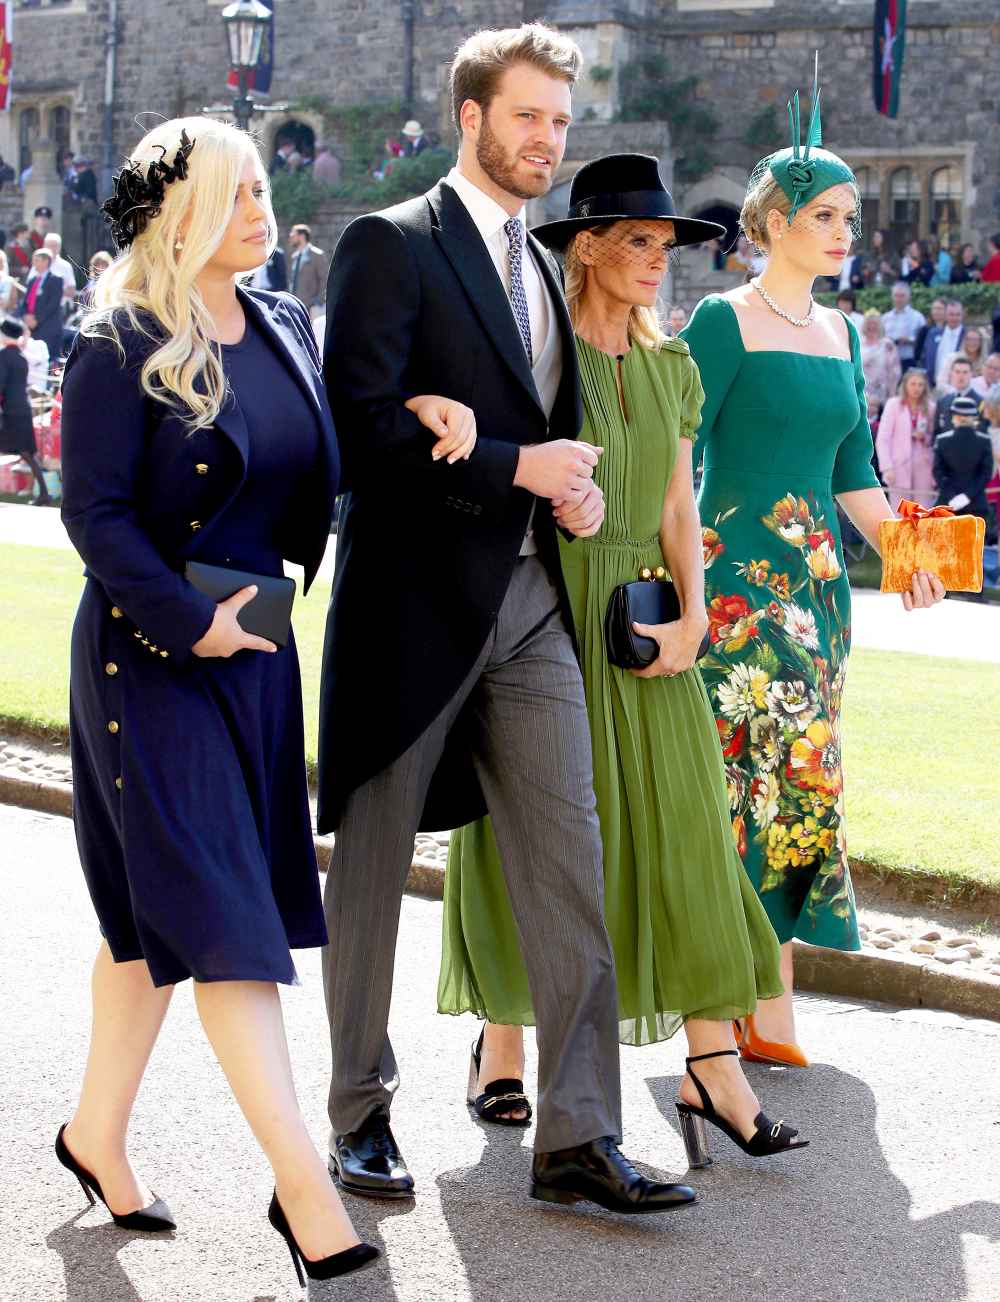 Eliza Spencer, Louis Spencer, Victoria Aitken and Kitty Spencer arrive for the wedding ceremony of Britain's Prince Harry and Meghan Markle at St George's Chapel, Windsor Castle on May 19, 2018 in Windsor, England.